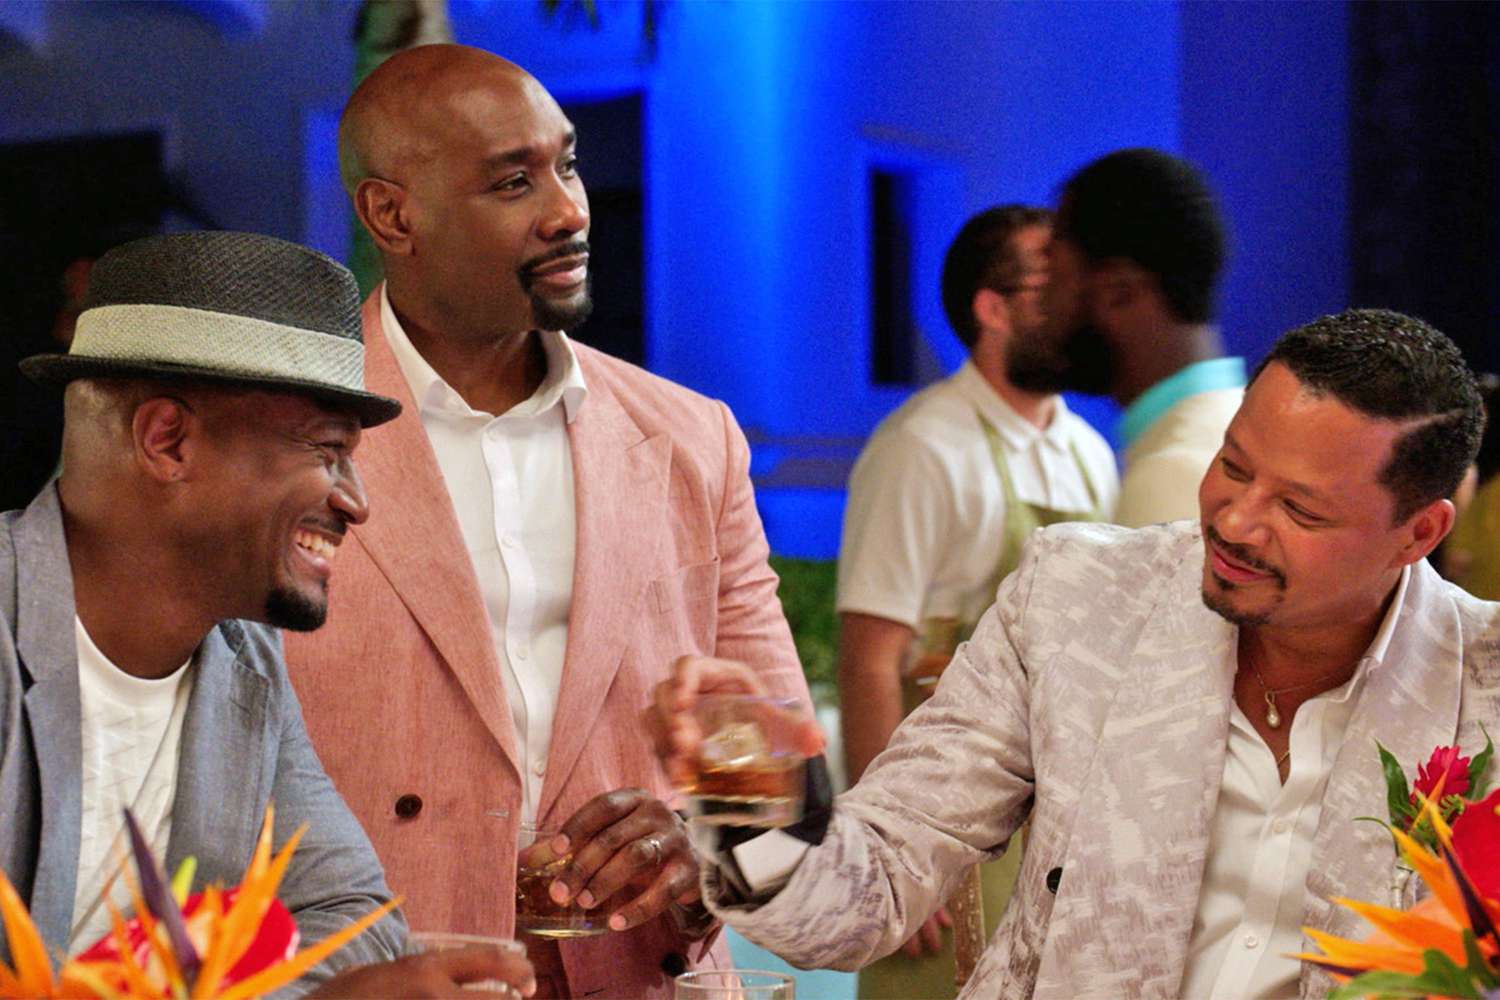 THE BEST MAN: THE FINAL CHAPTERS -- Episode 101 “Paradise” -- Pictured: (l-r) Taye Diggs as Harper, Morris Chestnut as Lance Sullivan, Terrence Howard as Quentin (Photo by: Peacock)